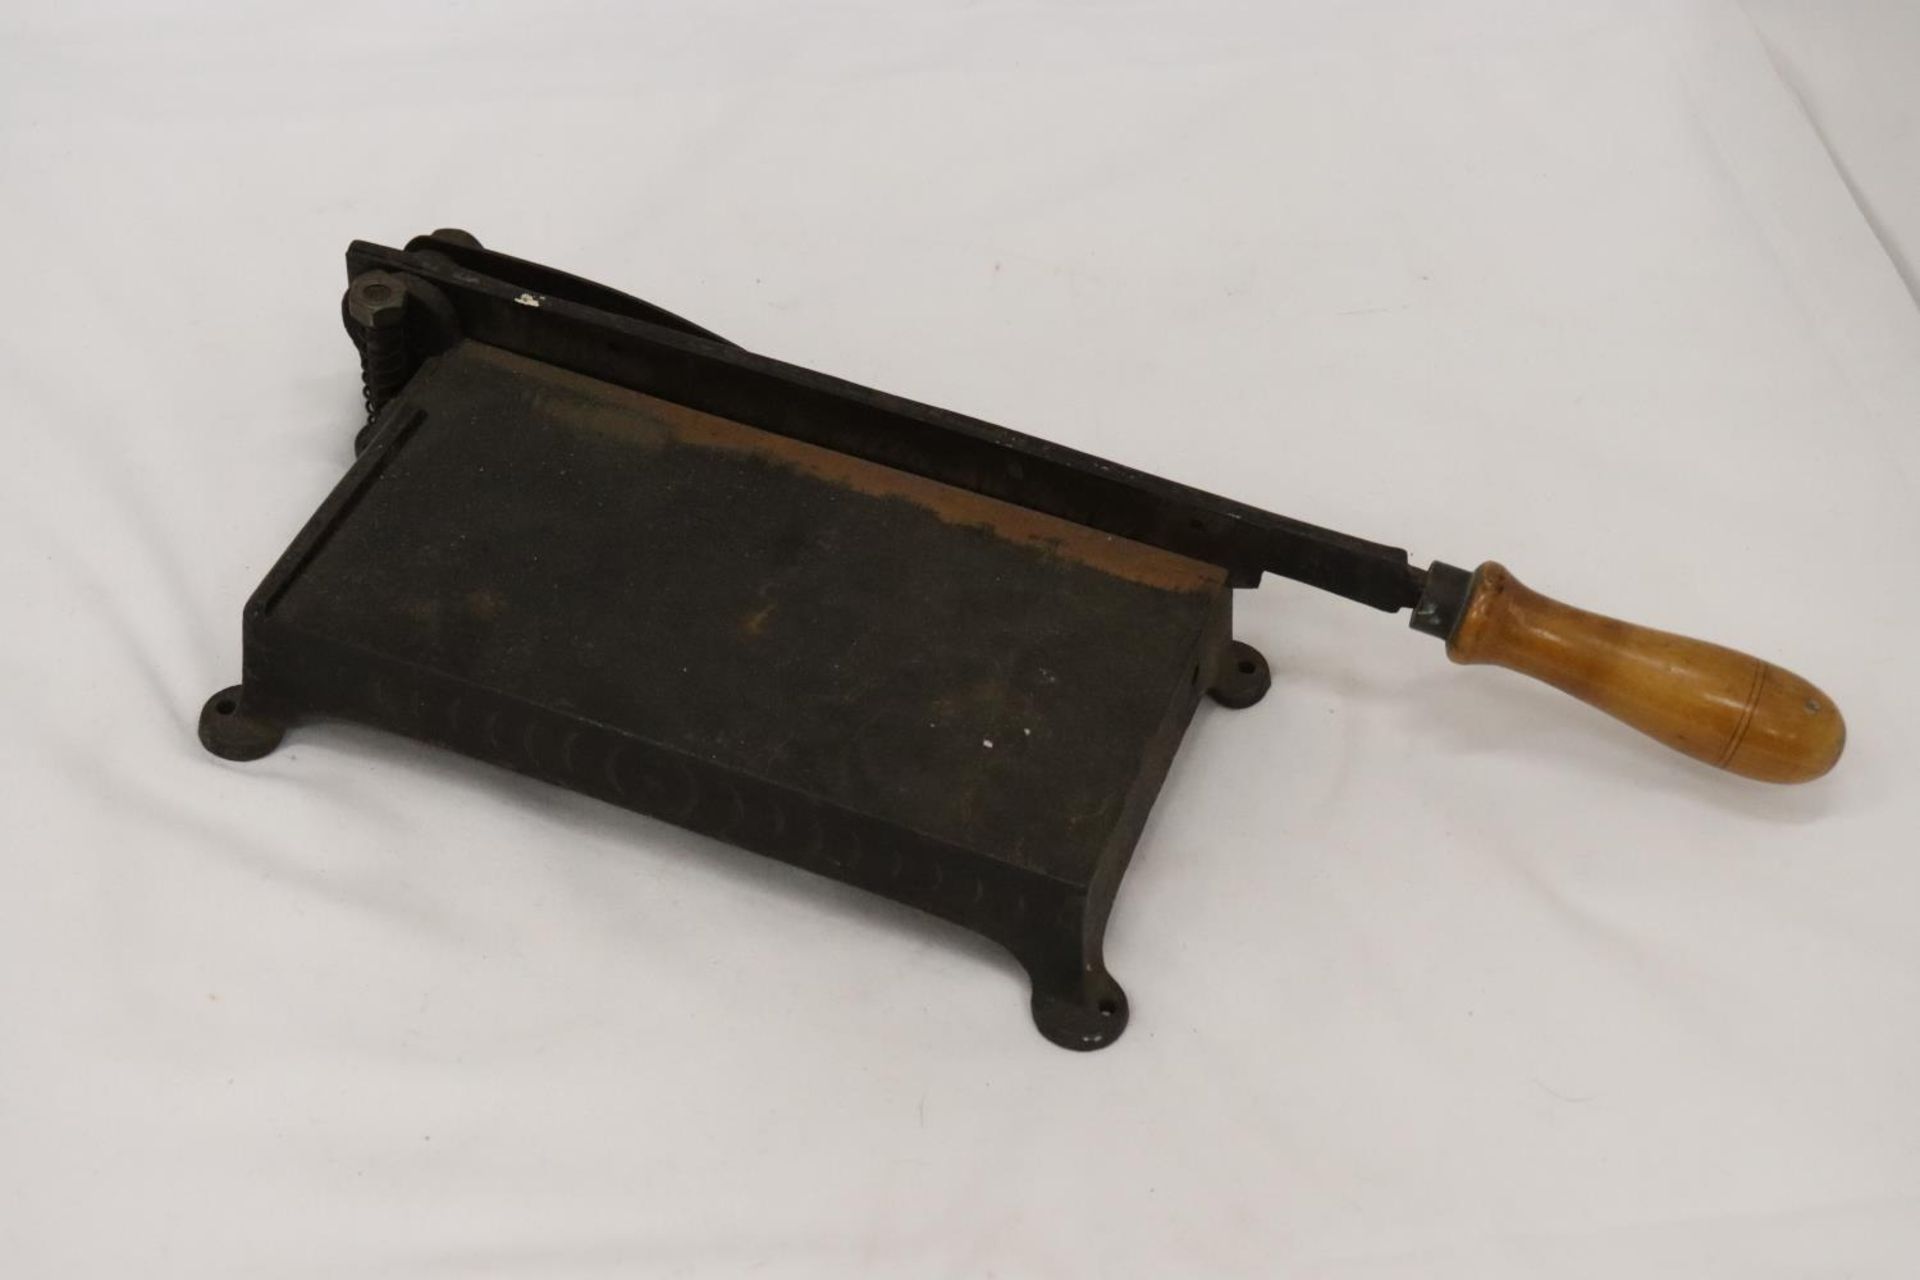 A VERY SHARP VINTAGE CAST GUILLOTINE